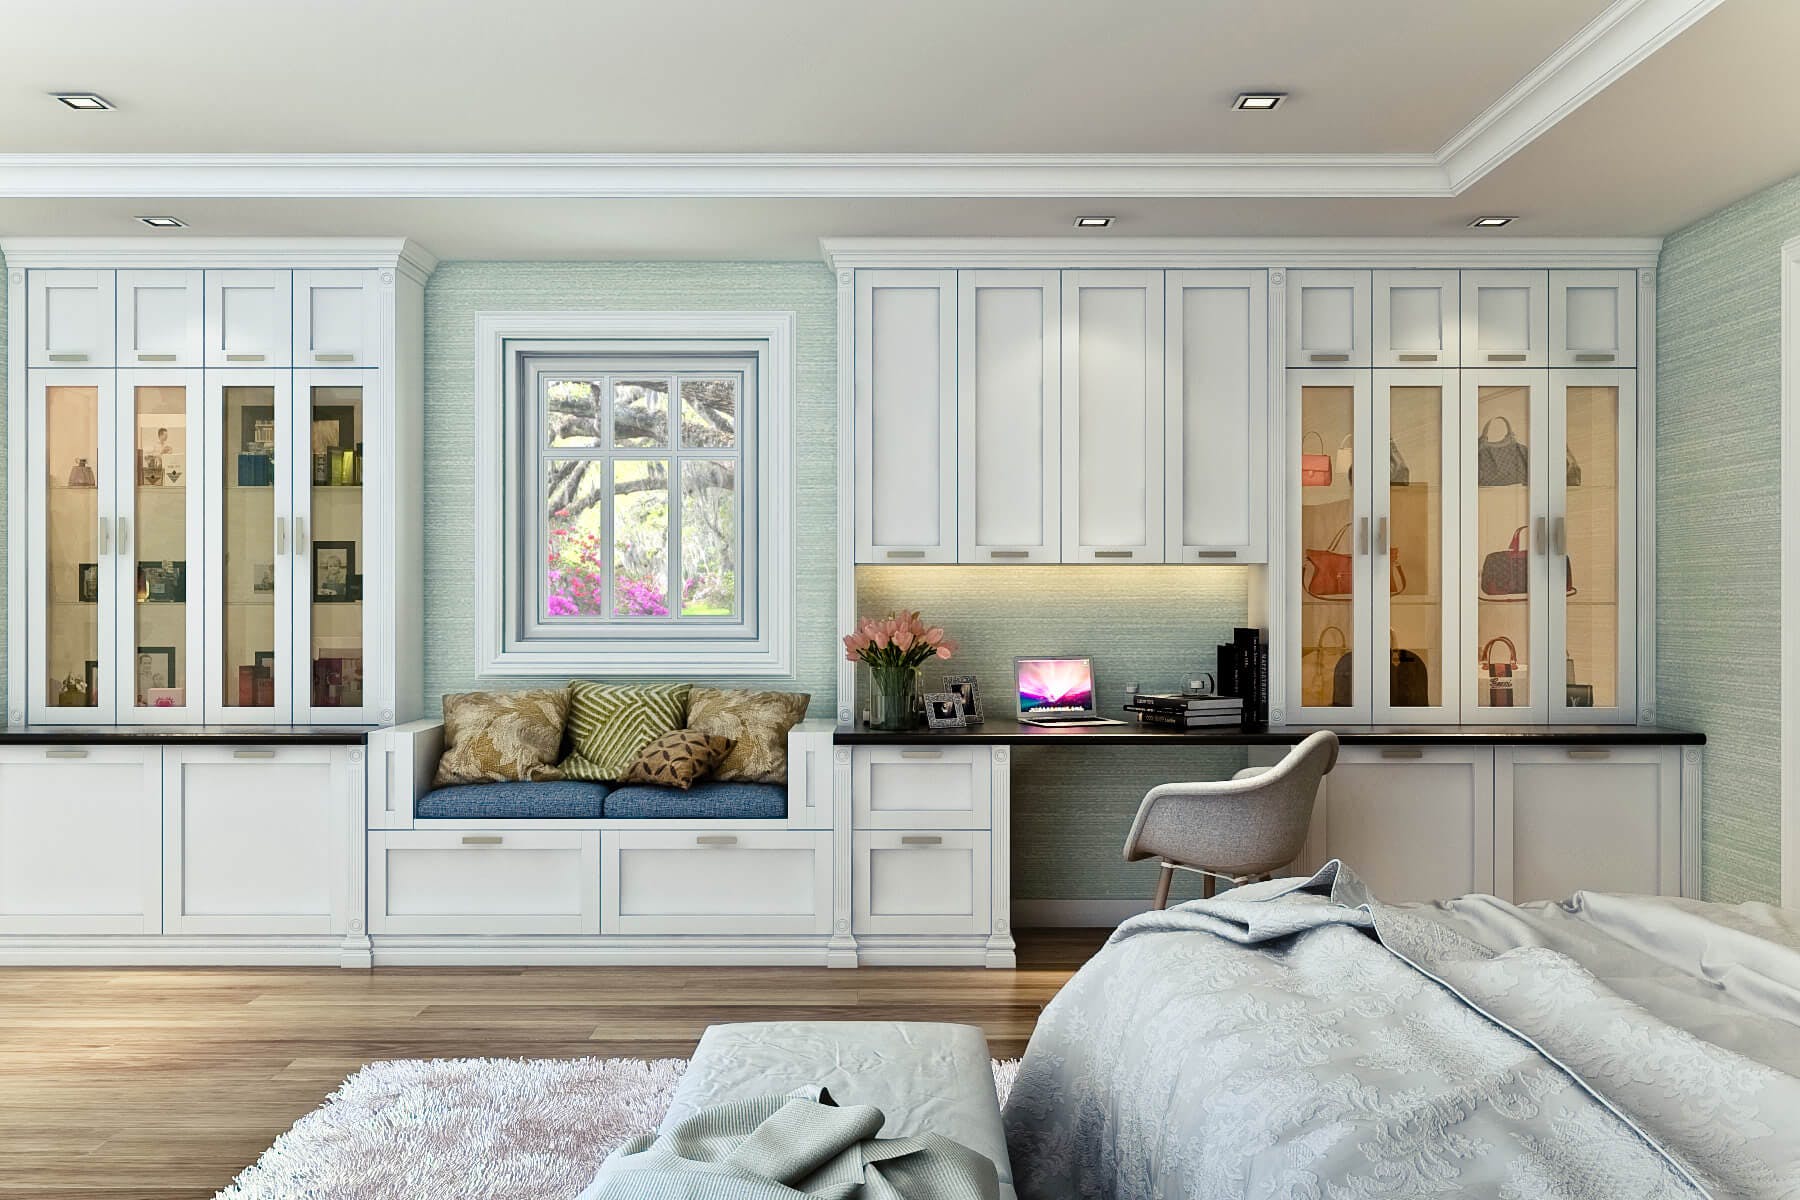 White shaker style custom wall unit in bedroom has window seat and workstation with upper cabinets and downlighting.